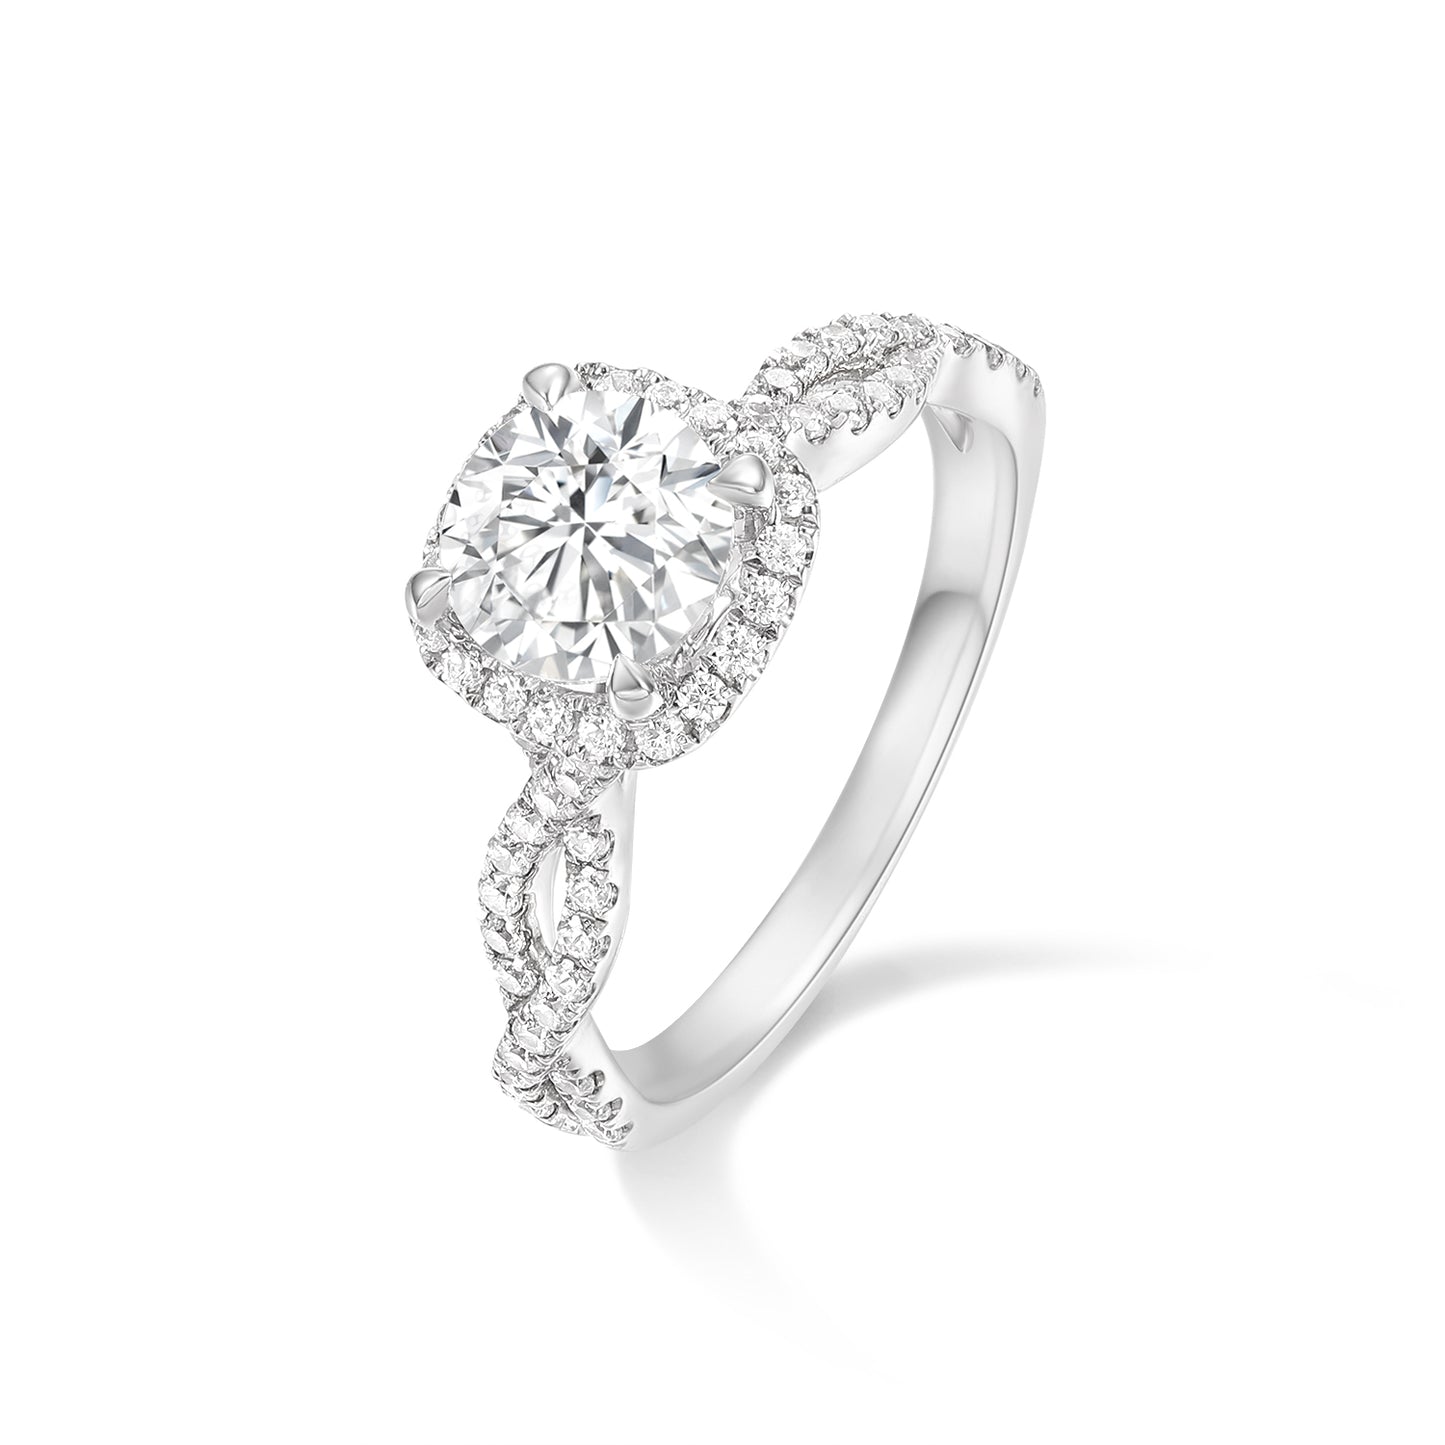 Diamond engagement rings for women | Poyas Jewelry